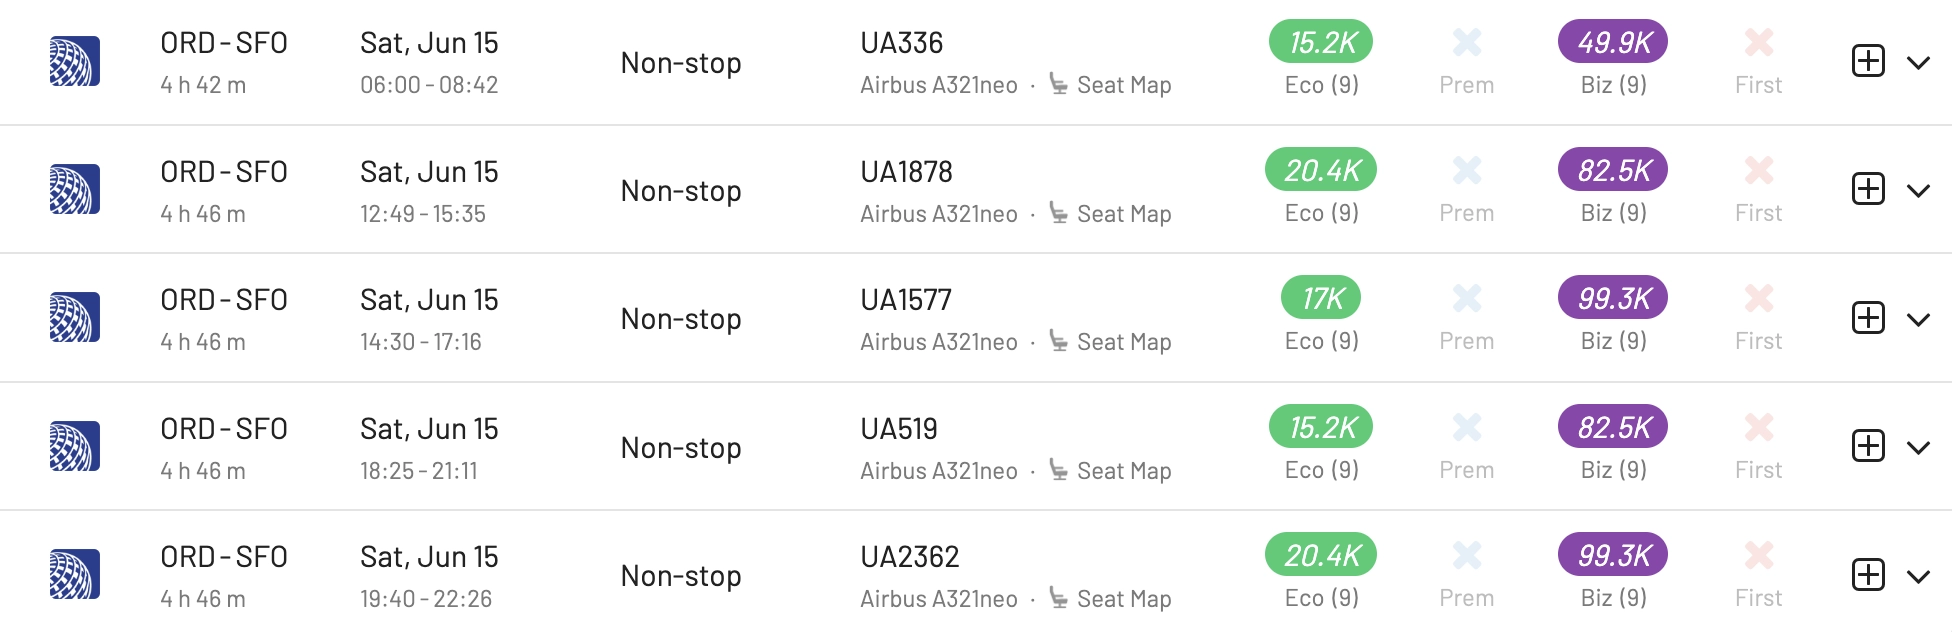 United A321neo Awards Available with MileagePlus.